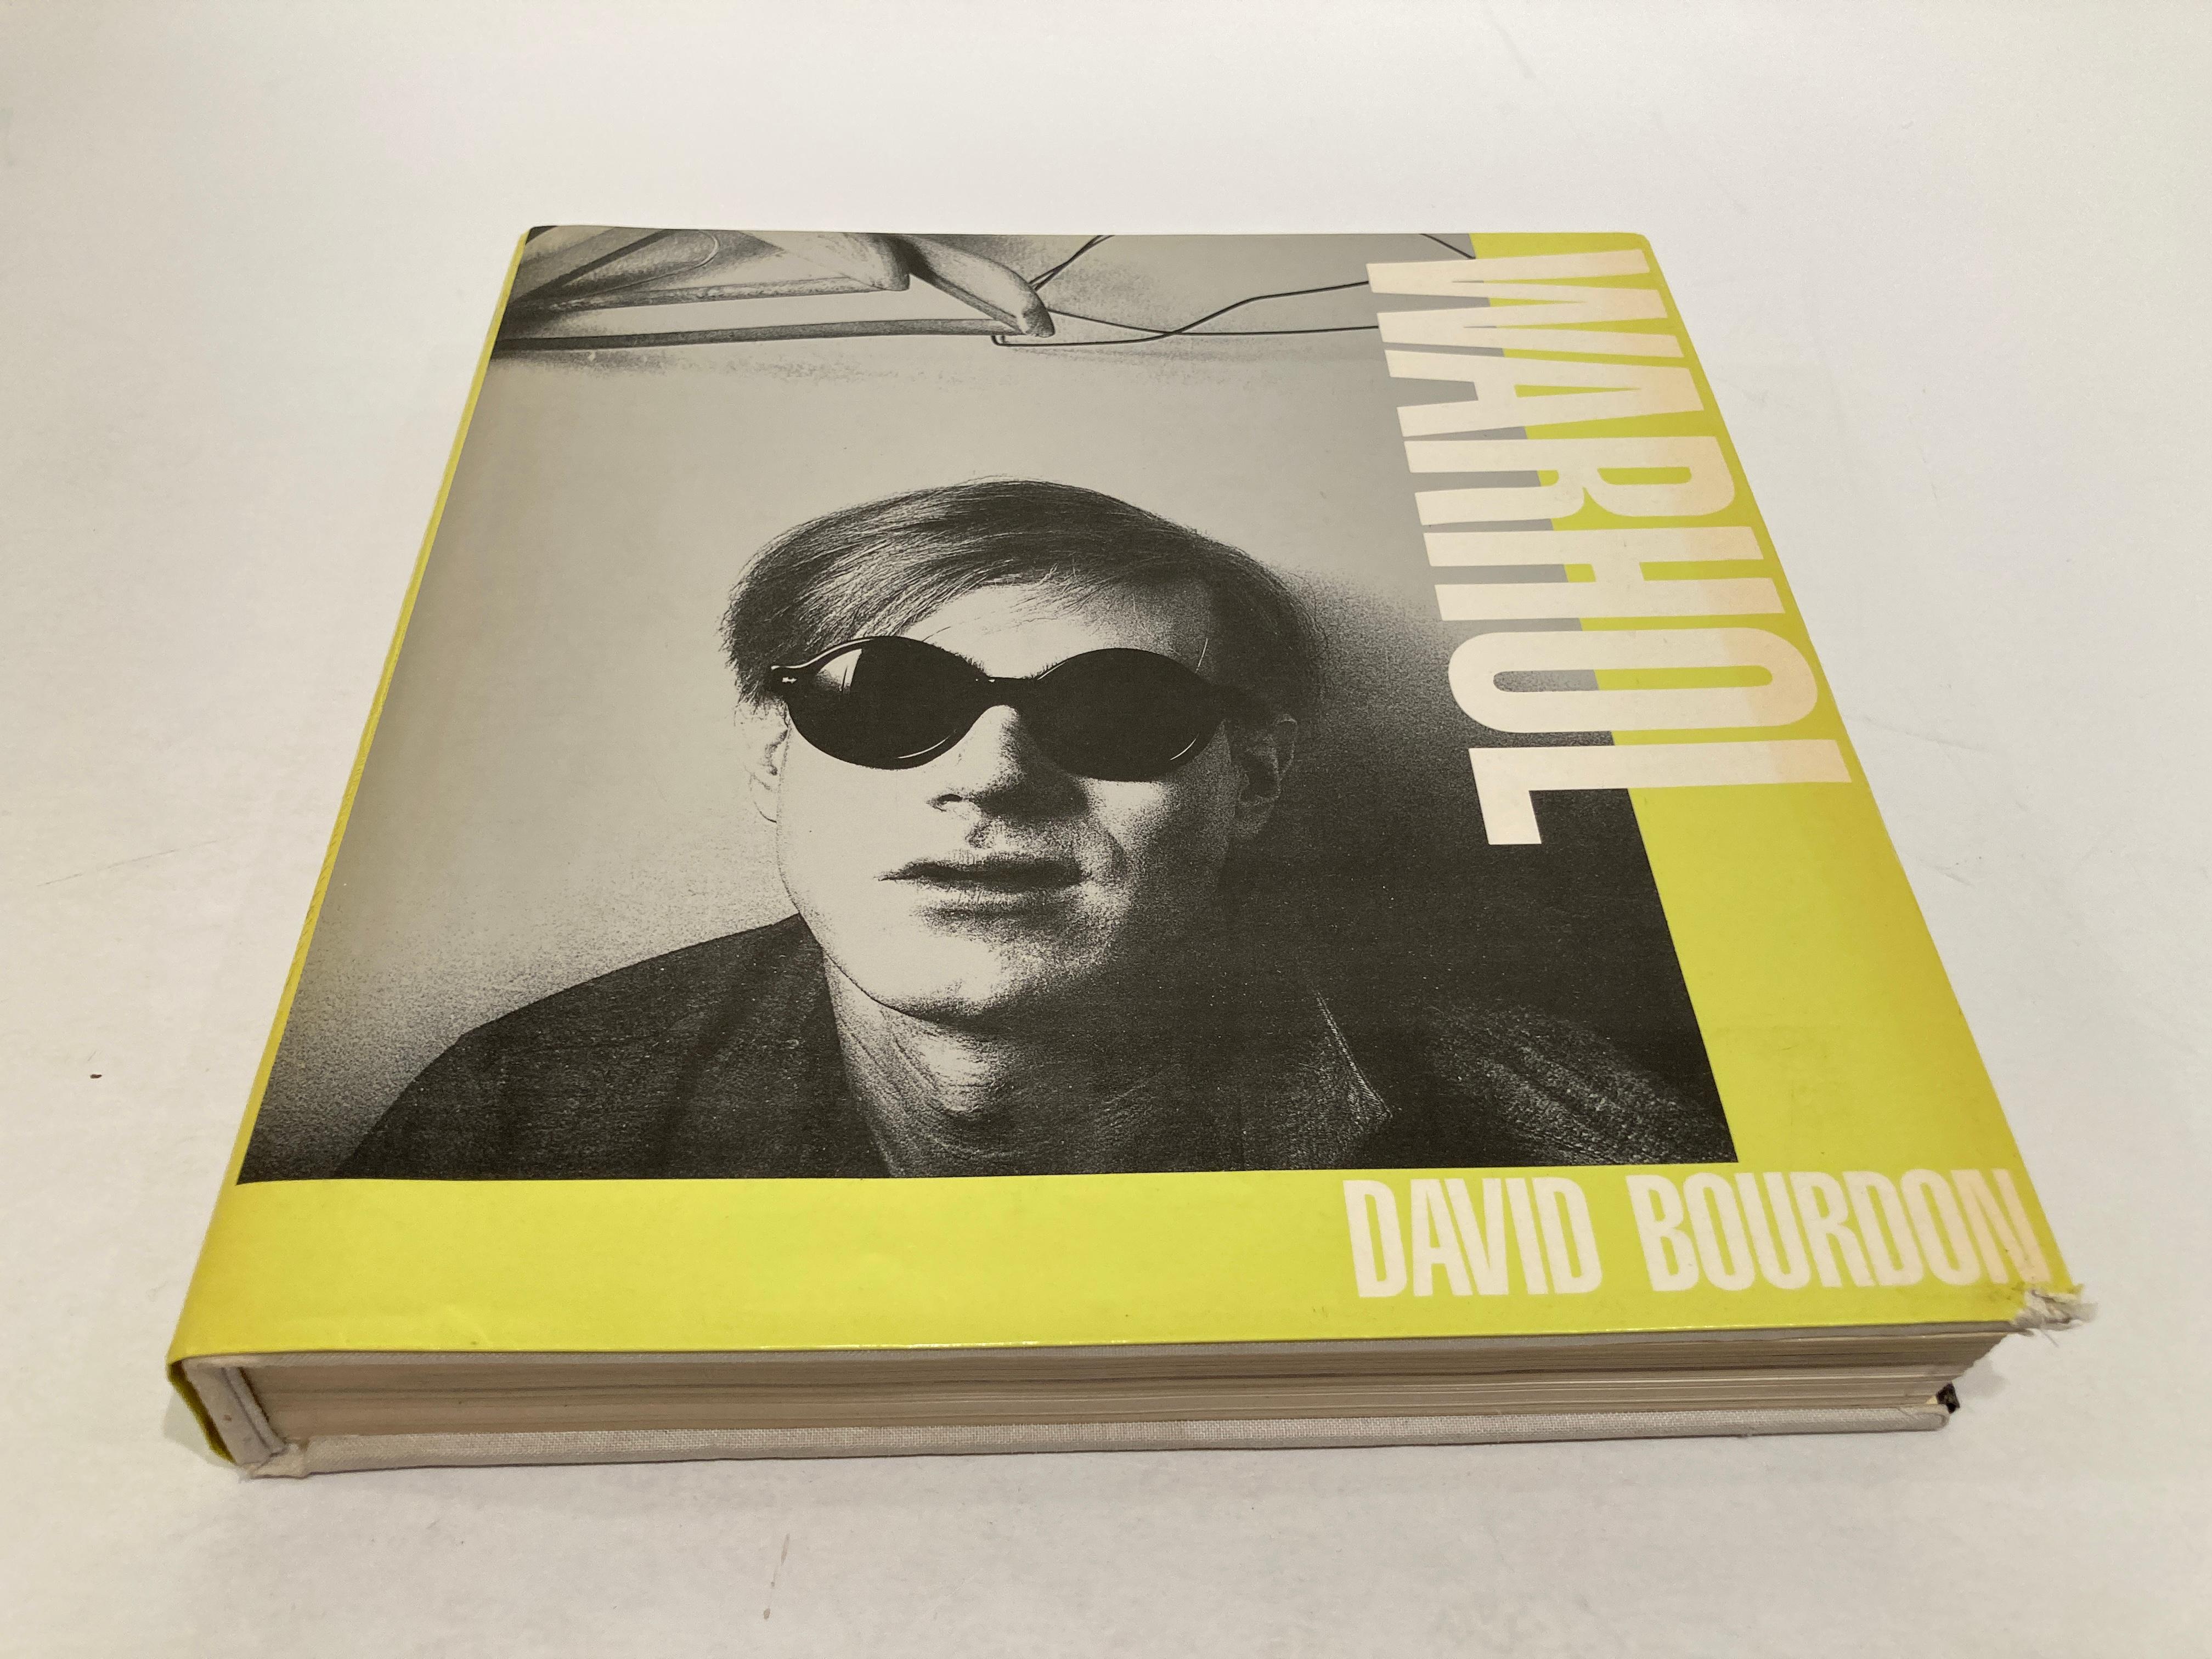 Andy Warhol by David BourdonVintage 1989, 
Abrams Book, Harry Schunk 1965 Photo Collector's Pop Art poster.
This Andy Warhol rare vintage 1989 iconic David Bourdon Abrams book harry Schunk 1965 photo collector's Pop Art poster is an incredibly